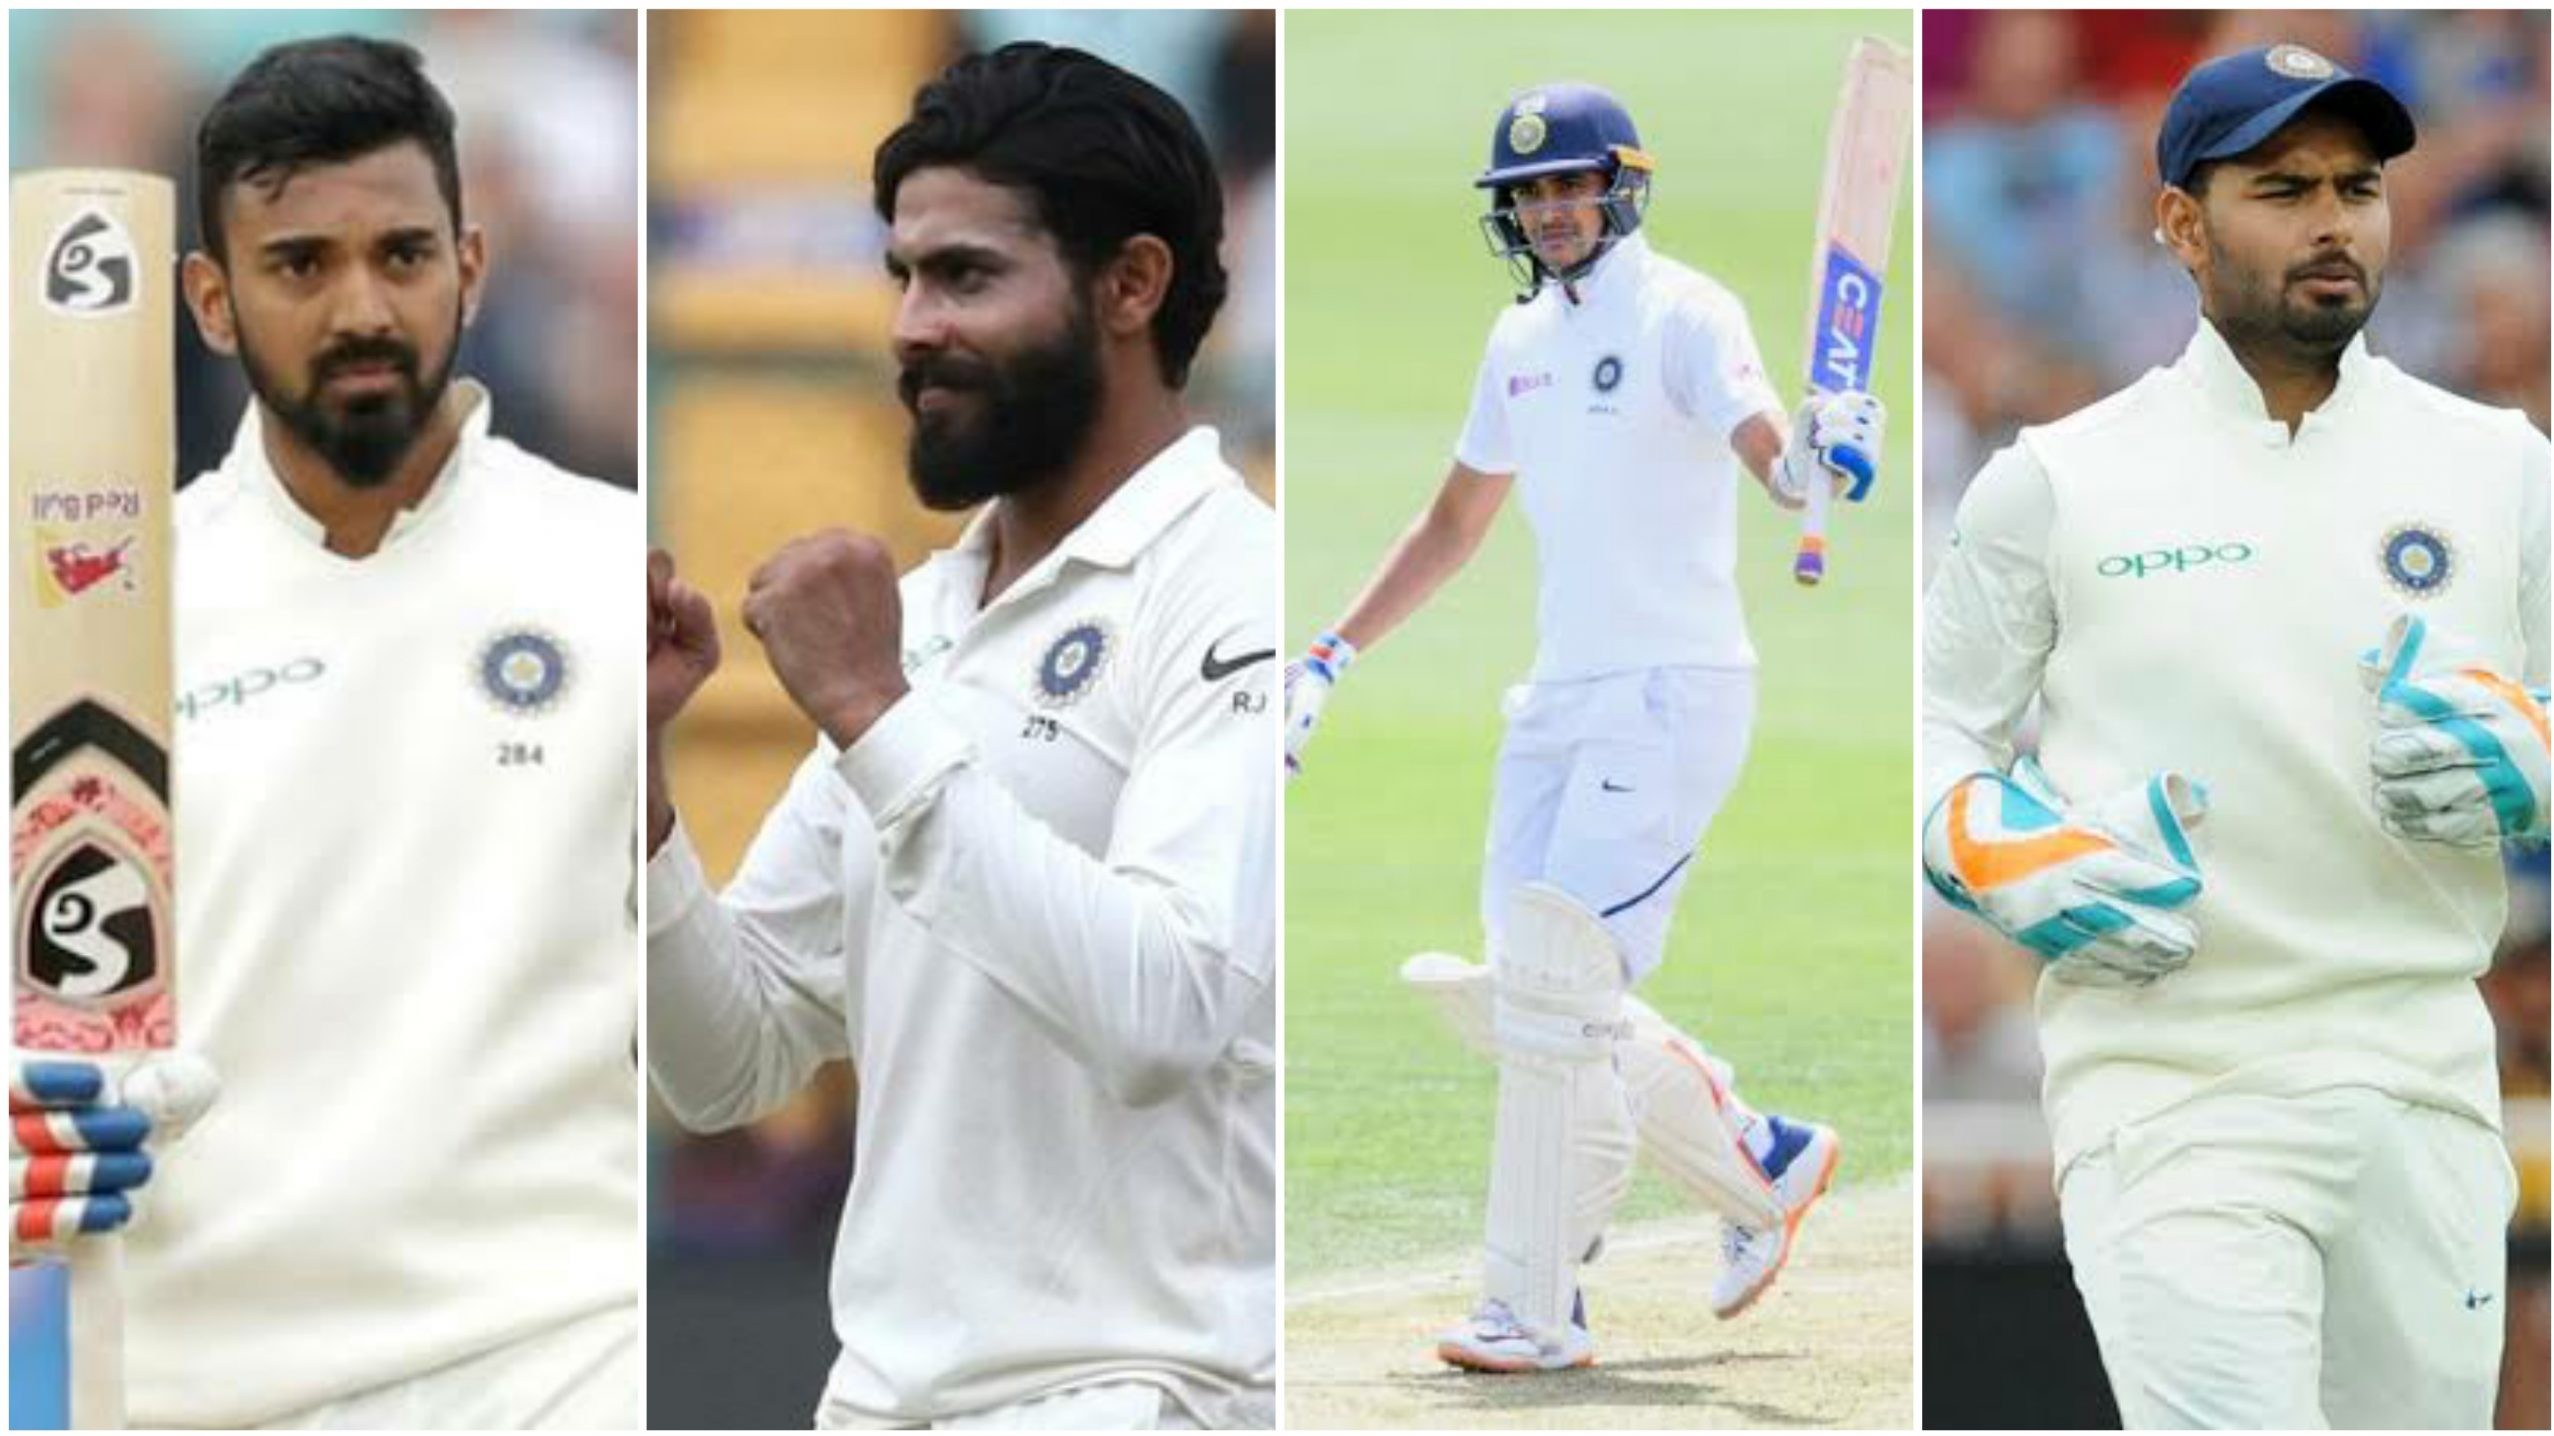 AUS v IND 2020-21: Team India to make 5 changes for the Boxing Day Test, says report